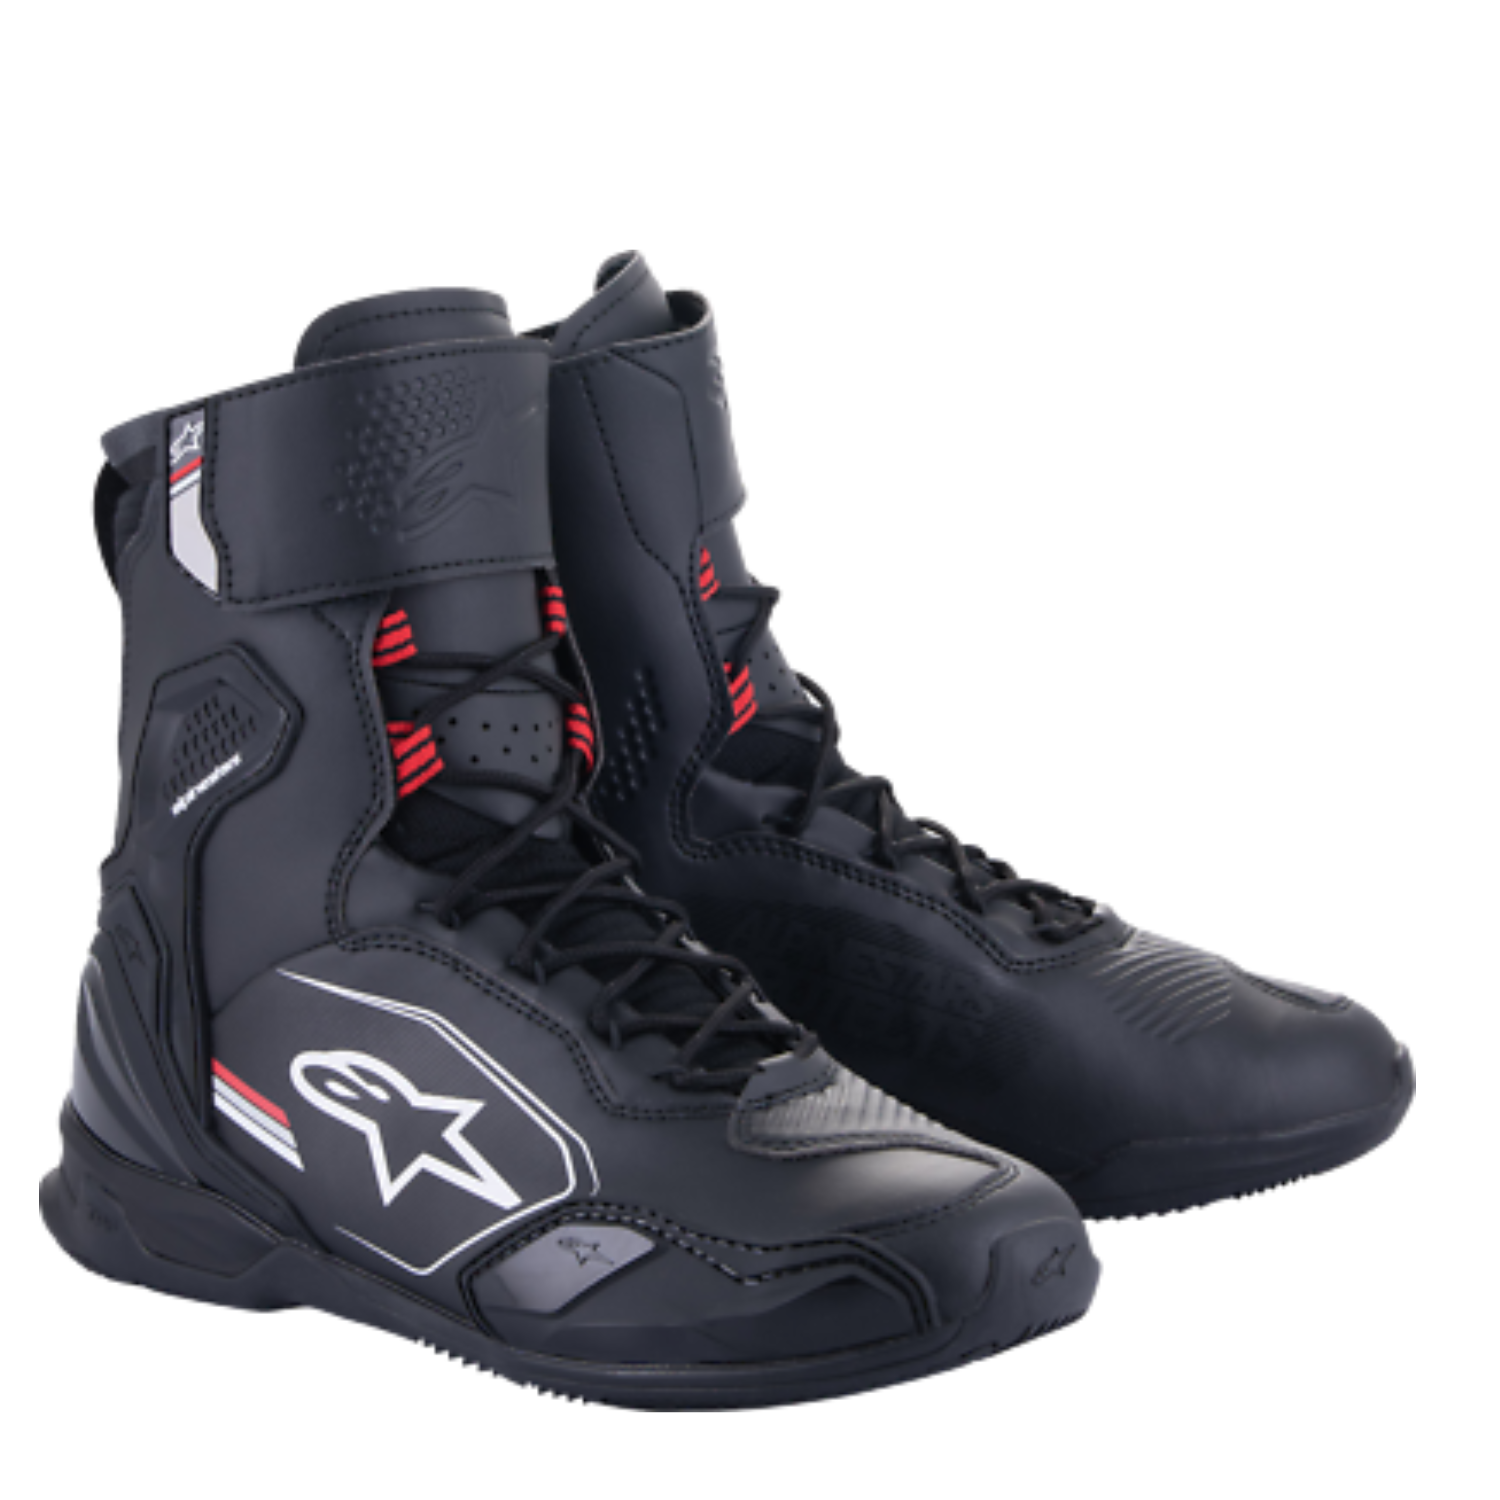 Image of Alpinestars Superfaster Shoes Black Gray Bright Red Size US 12 EN